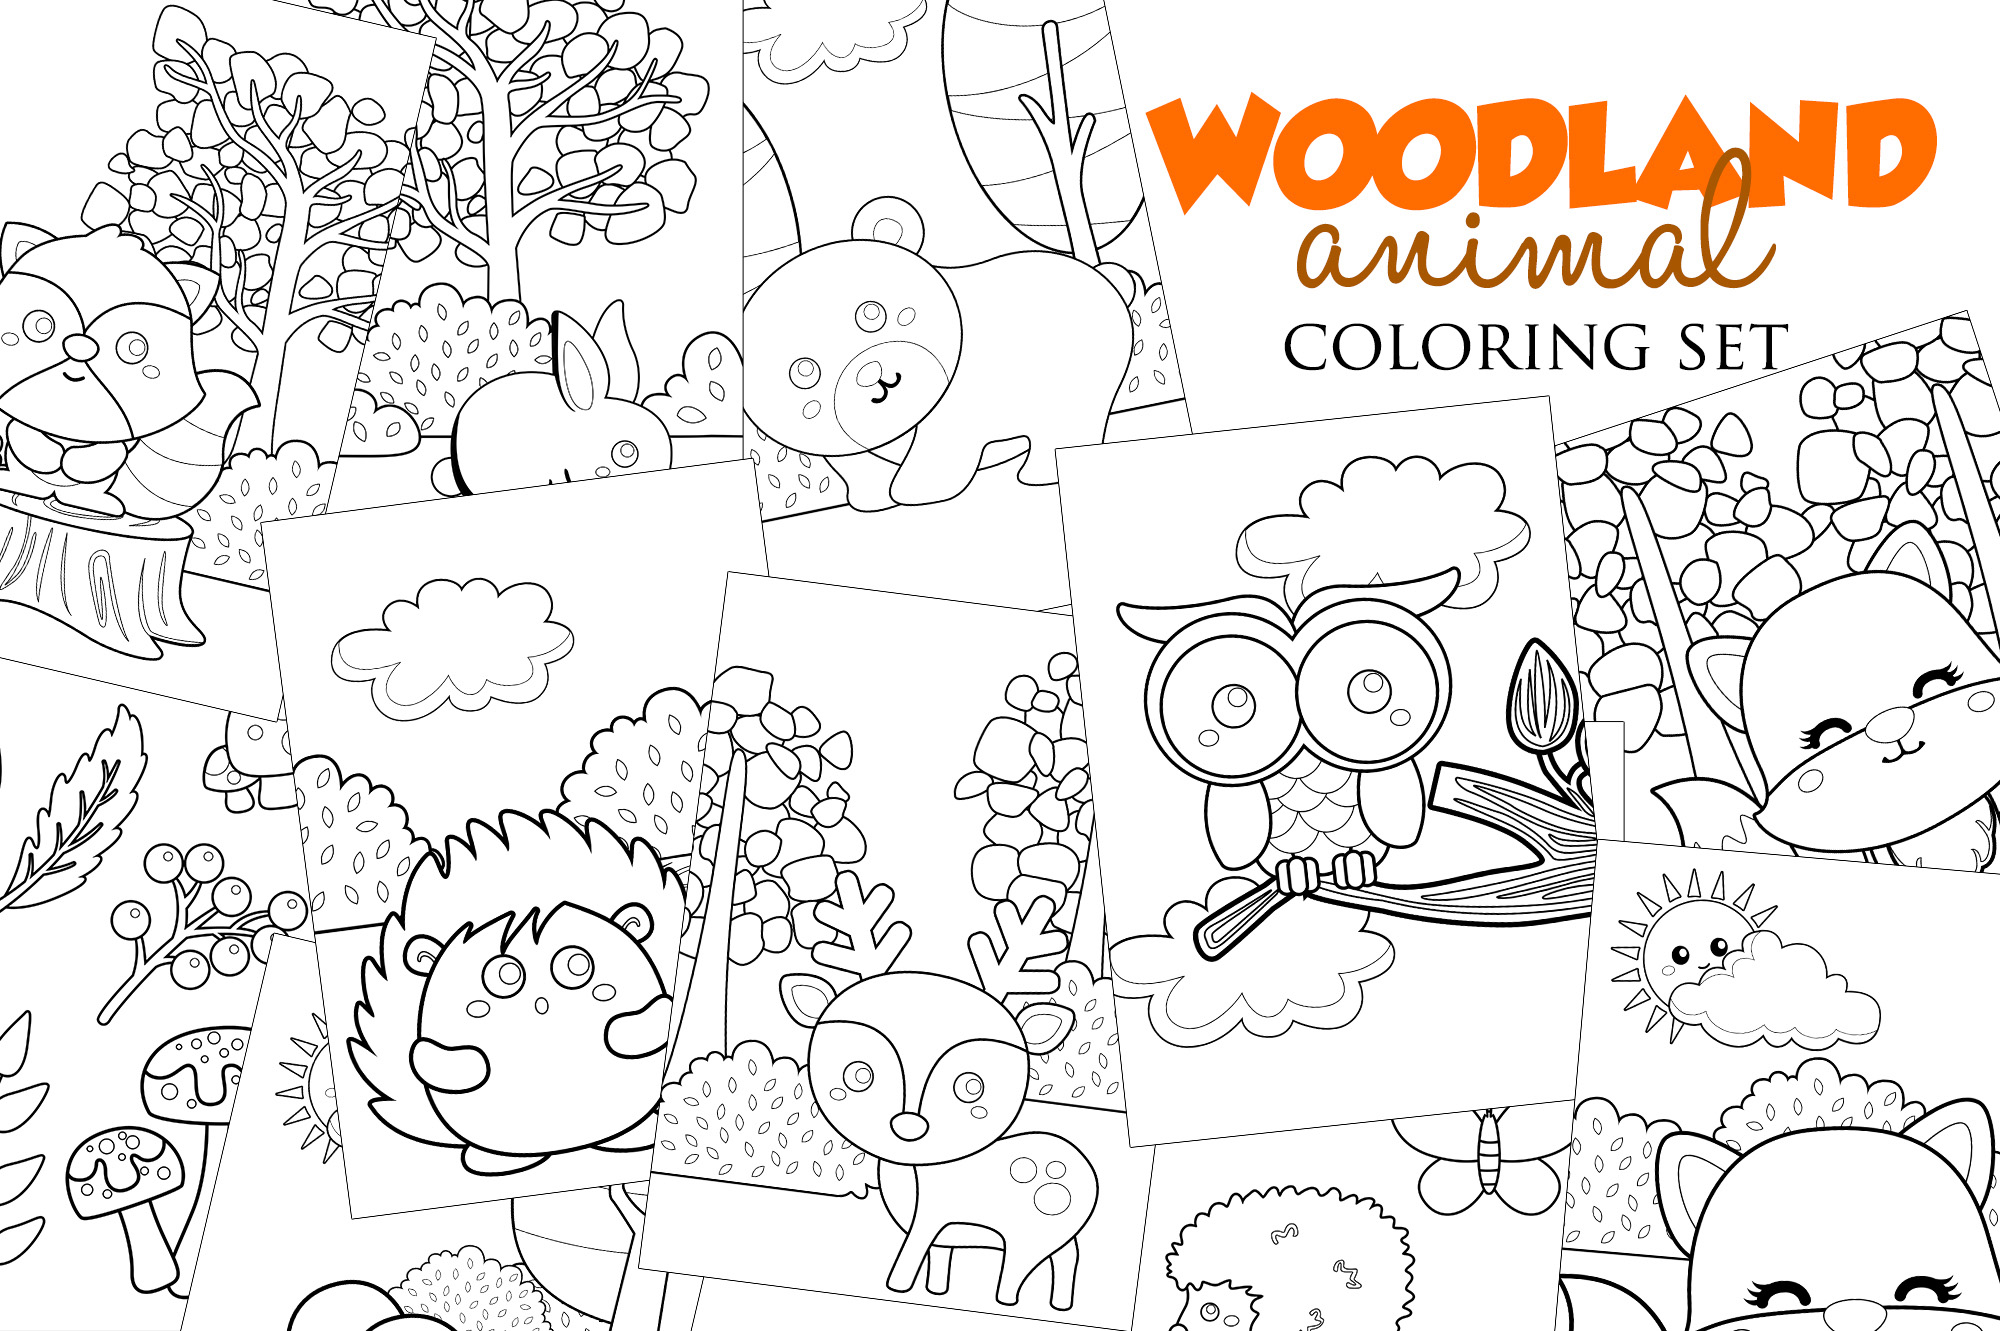 Coloring page for woodland animals.